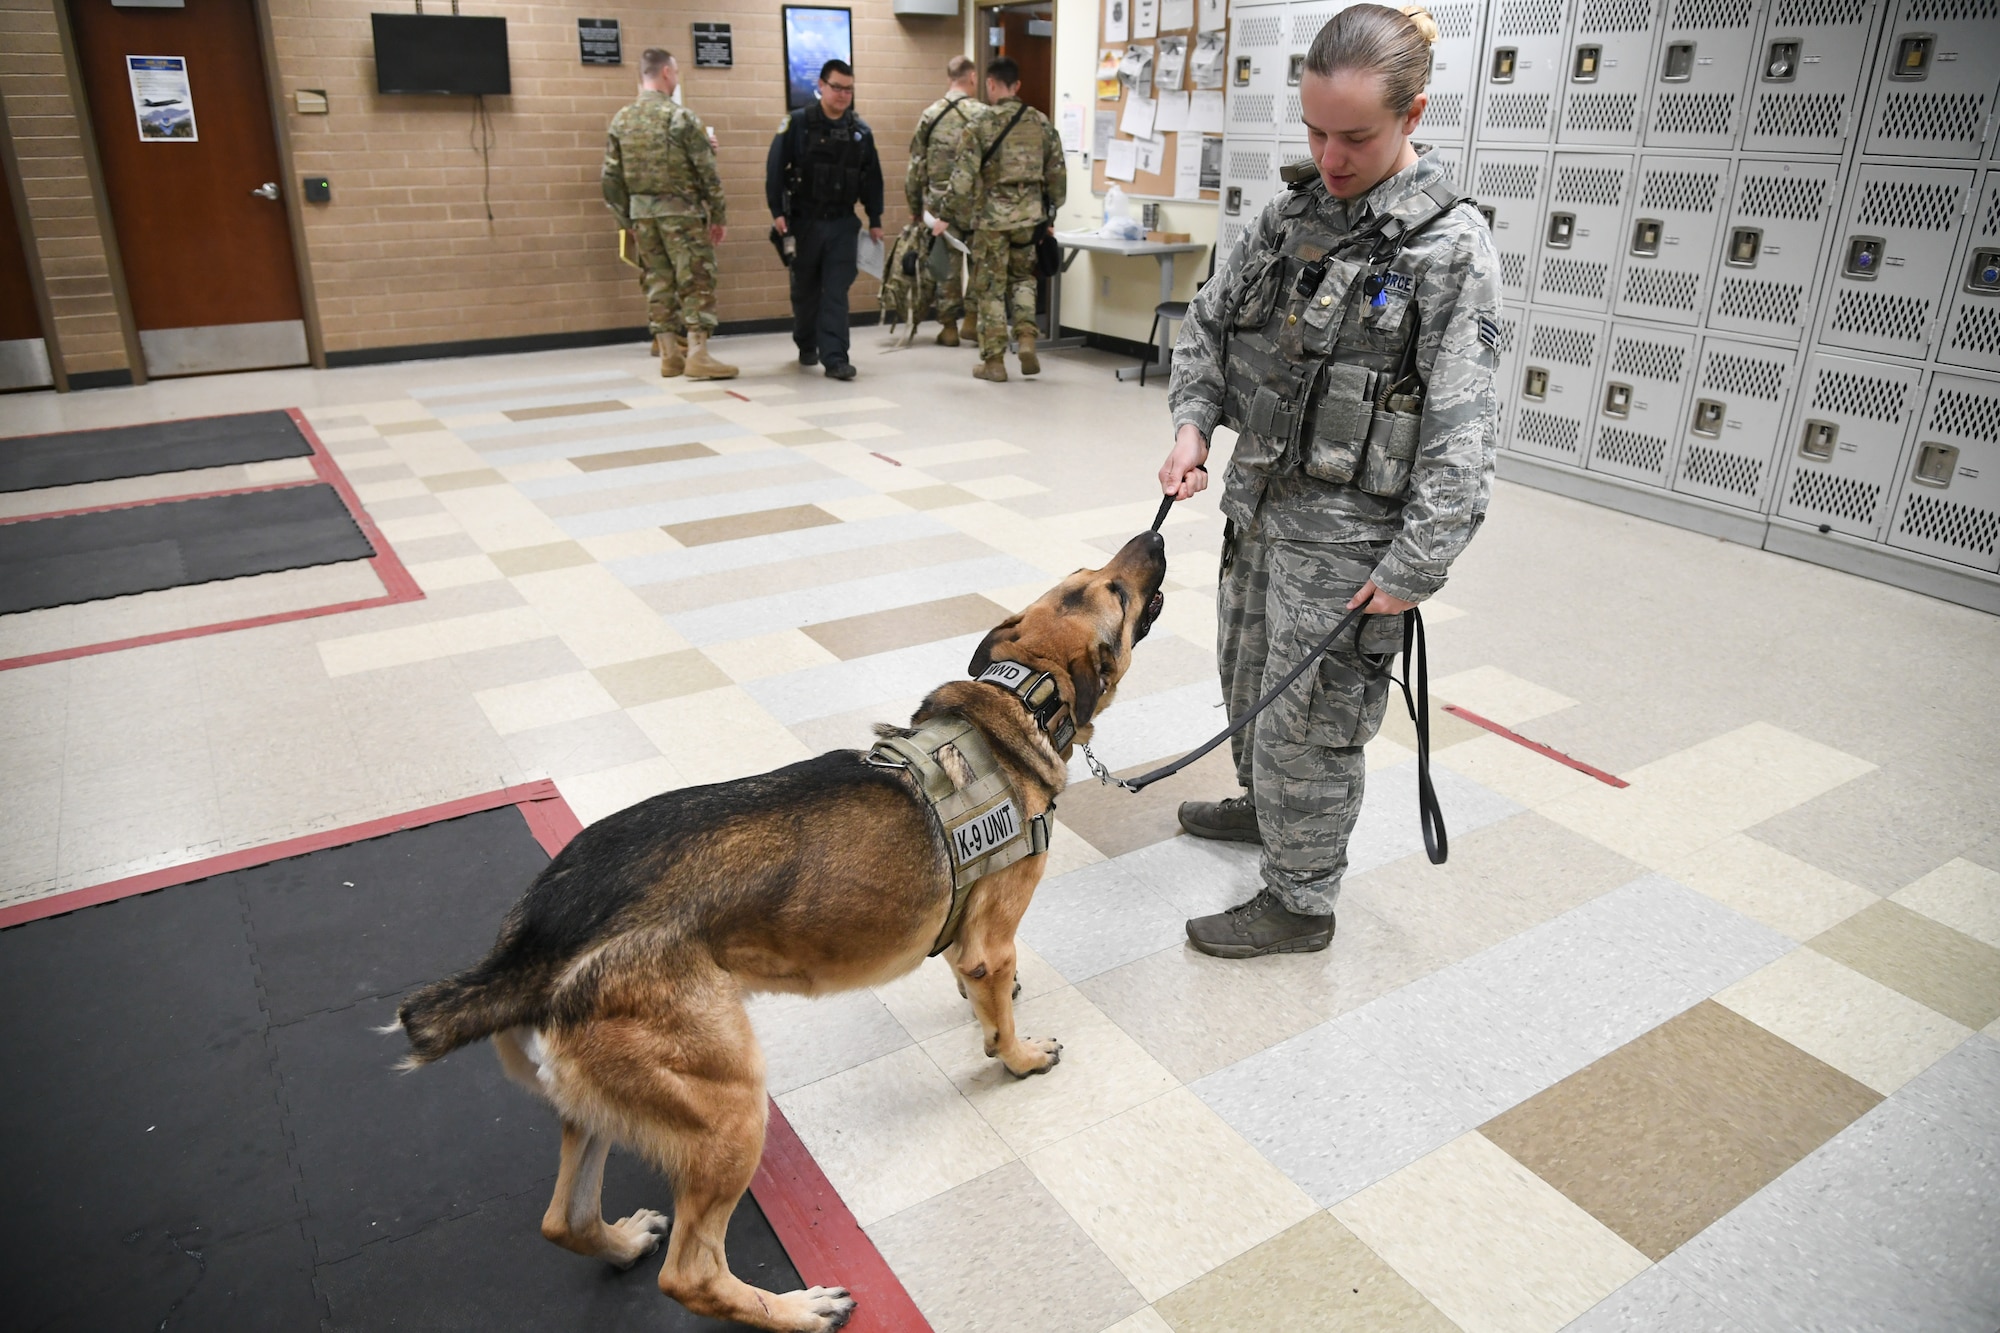 Senior Airman Michelle Winters, 75th Security Force Squadron, rewards Joe, a military working dog, with a toy for staying calm during a roll call at Hill Air Force Base, Utah, March 4, 2020. Joe is a single-purpose MWD, trained as an explosive detection dog. (U.S. Air Force photo by Cynthia Griggs)